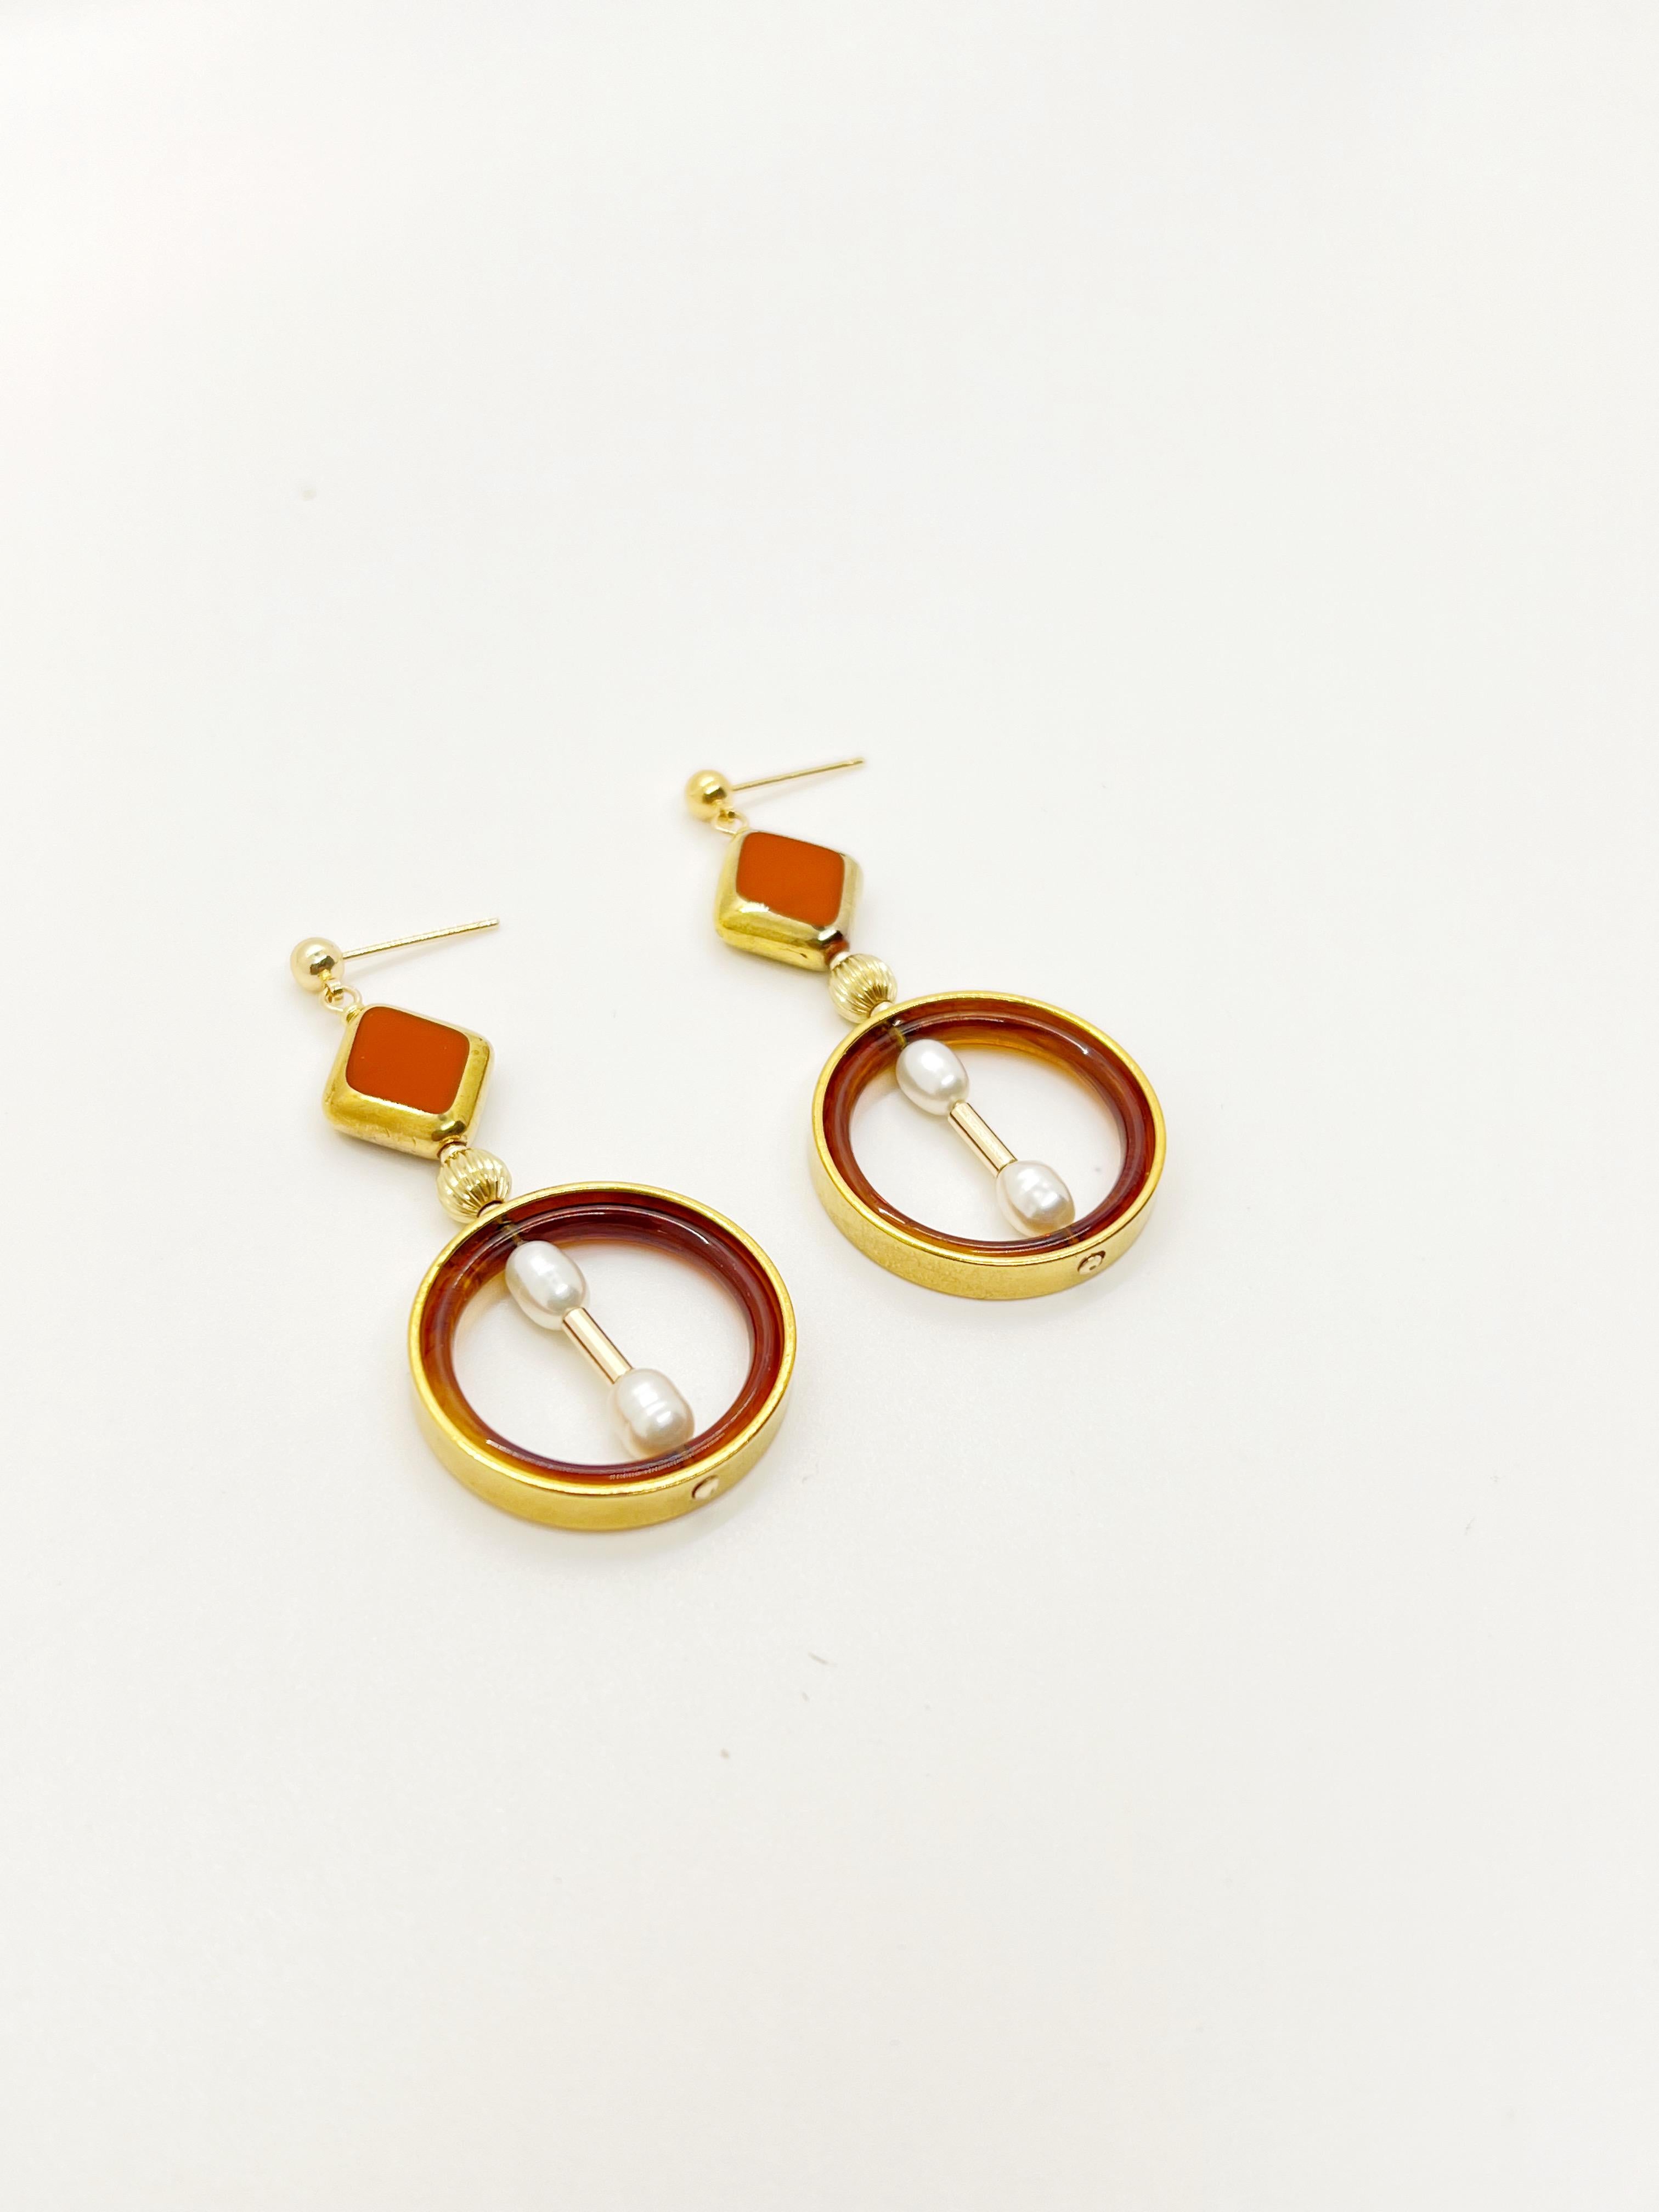 Each earring consist of Caramel colored vintage German glass beads edged with gold, vintage lucite, freshwater pearls, brass metal plated with 24K gold, gold-filled findings and ear stud. 

The vintage German glass beads were hand pressed during the